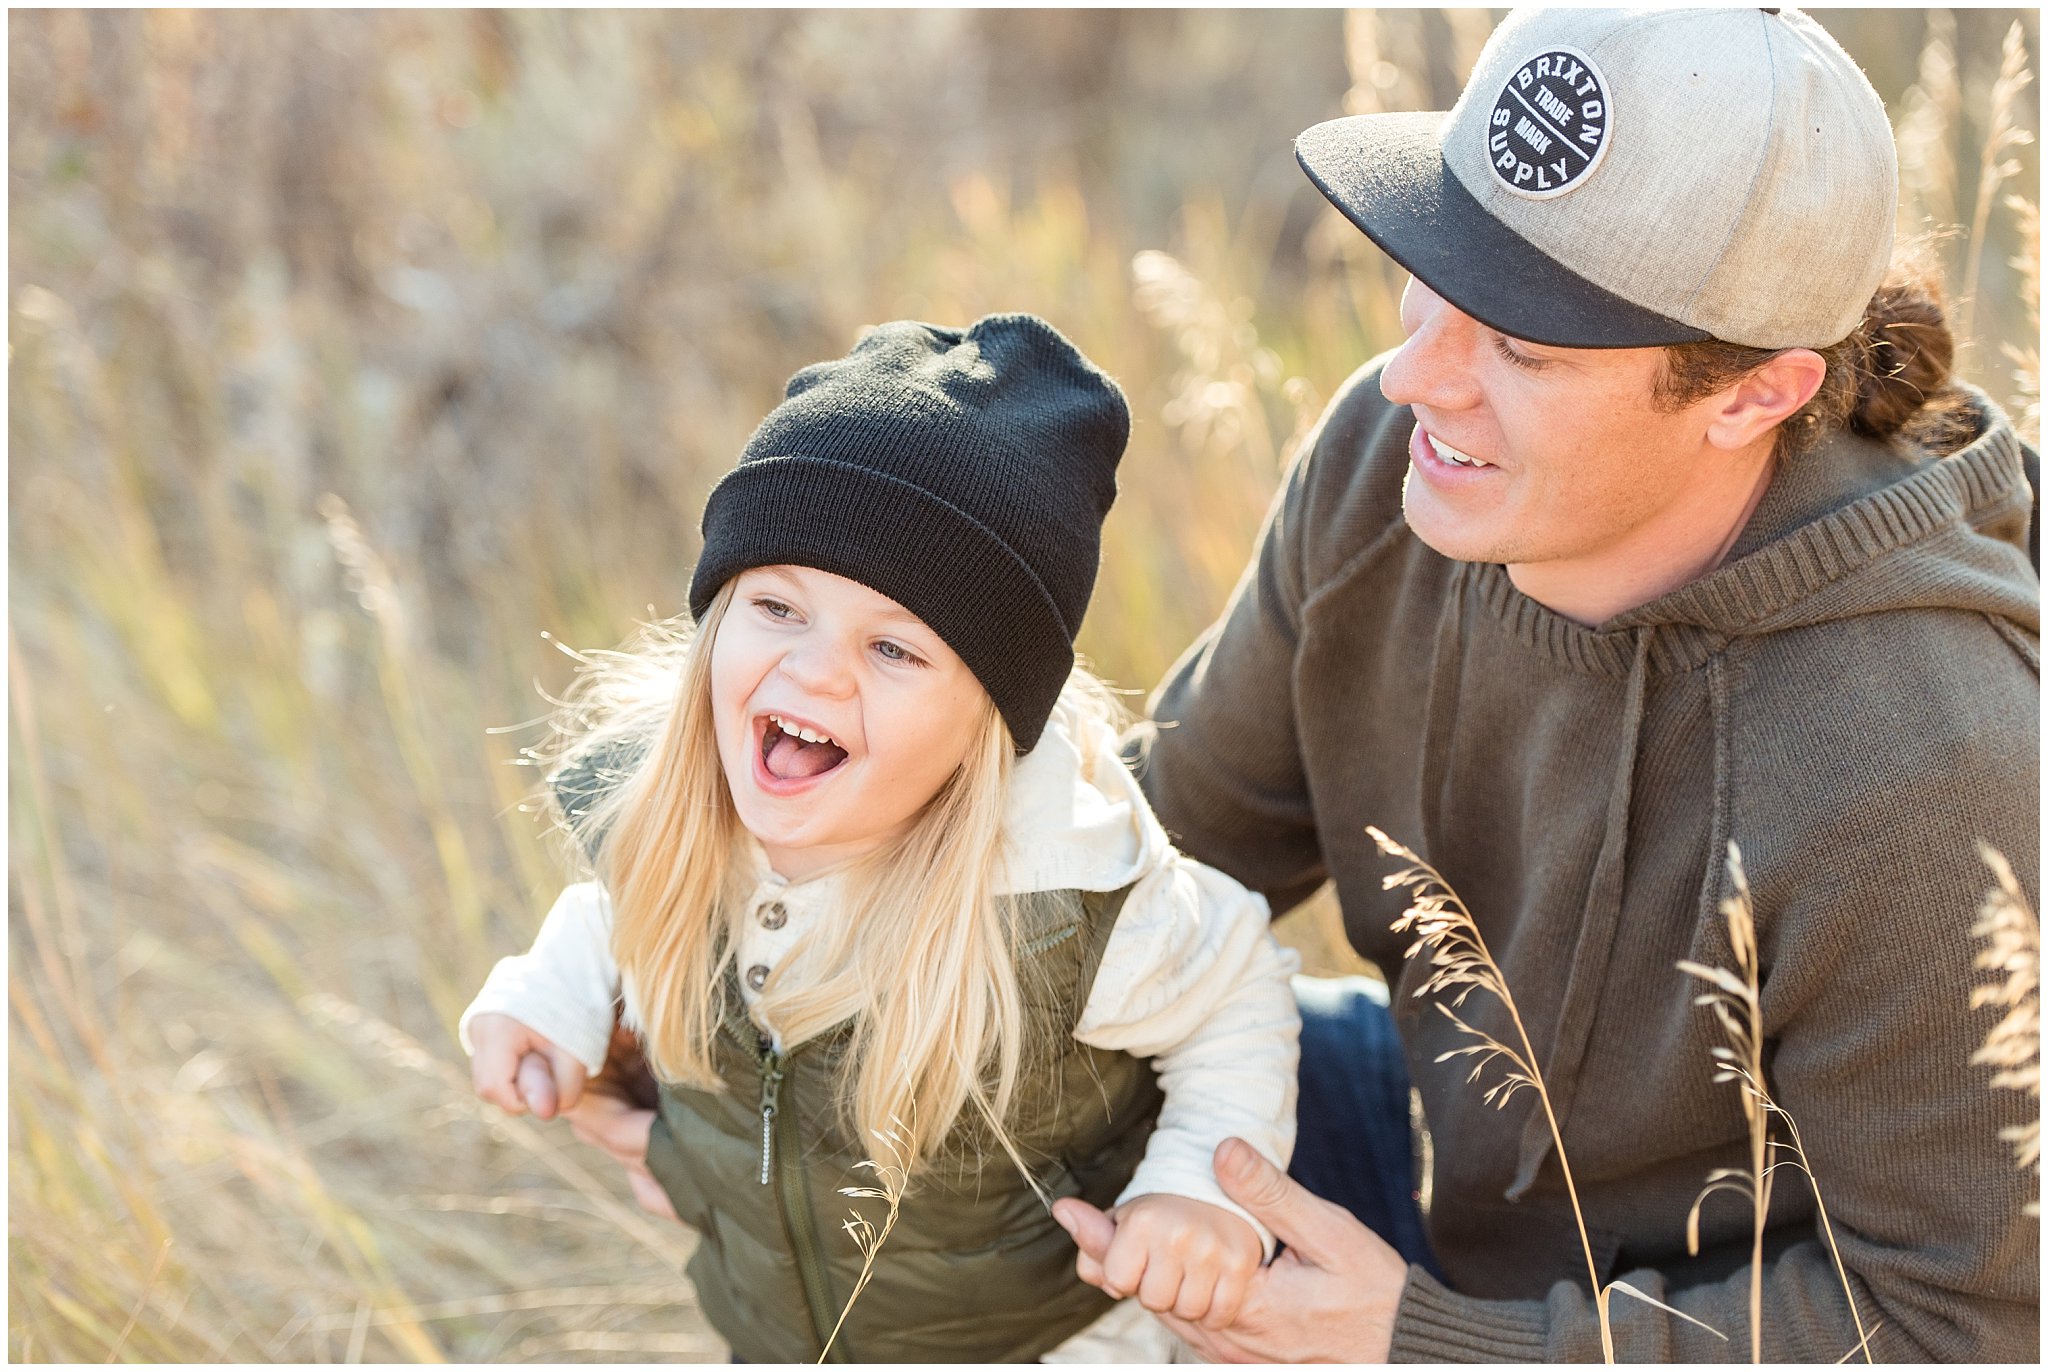 Son laughing with dad | Fall Family Pictures in the Mountains | Snowbasin, Utah | Jessie and Dallin